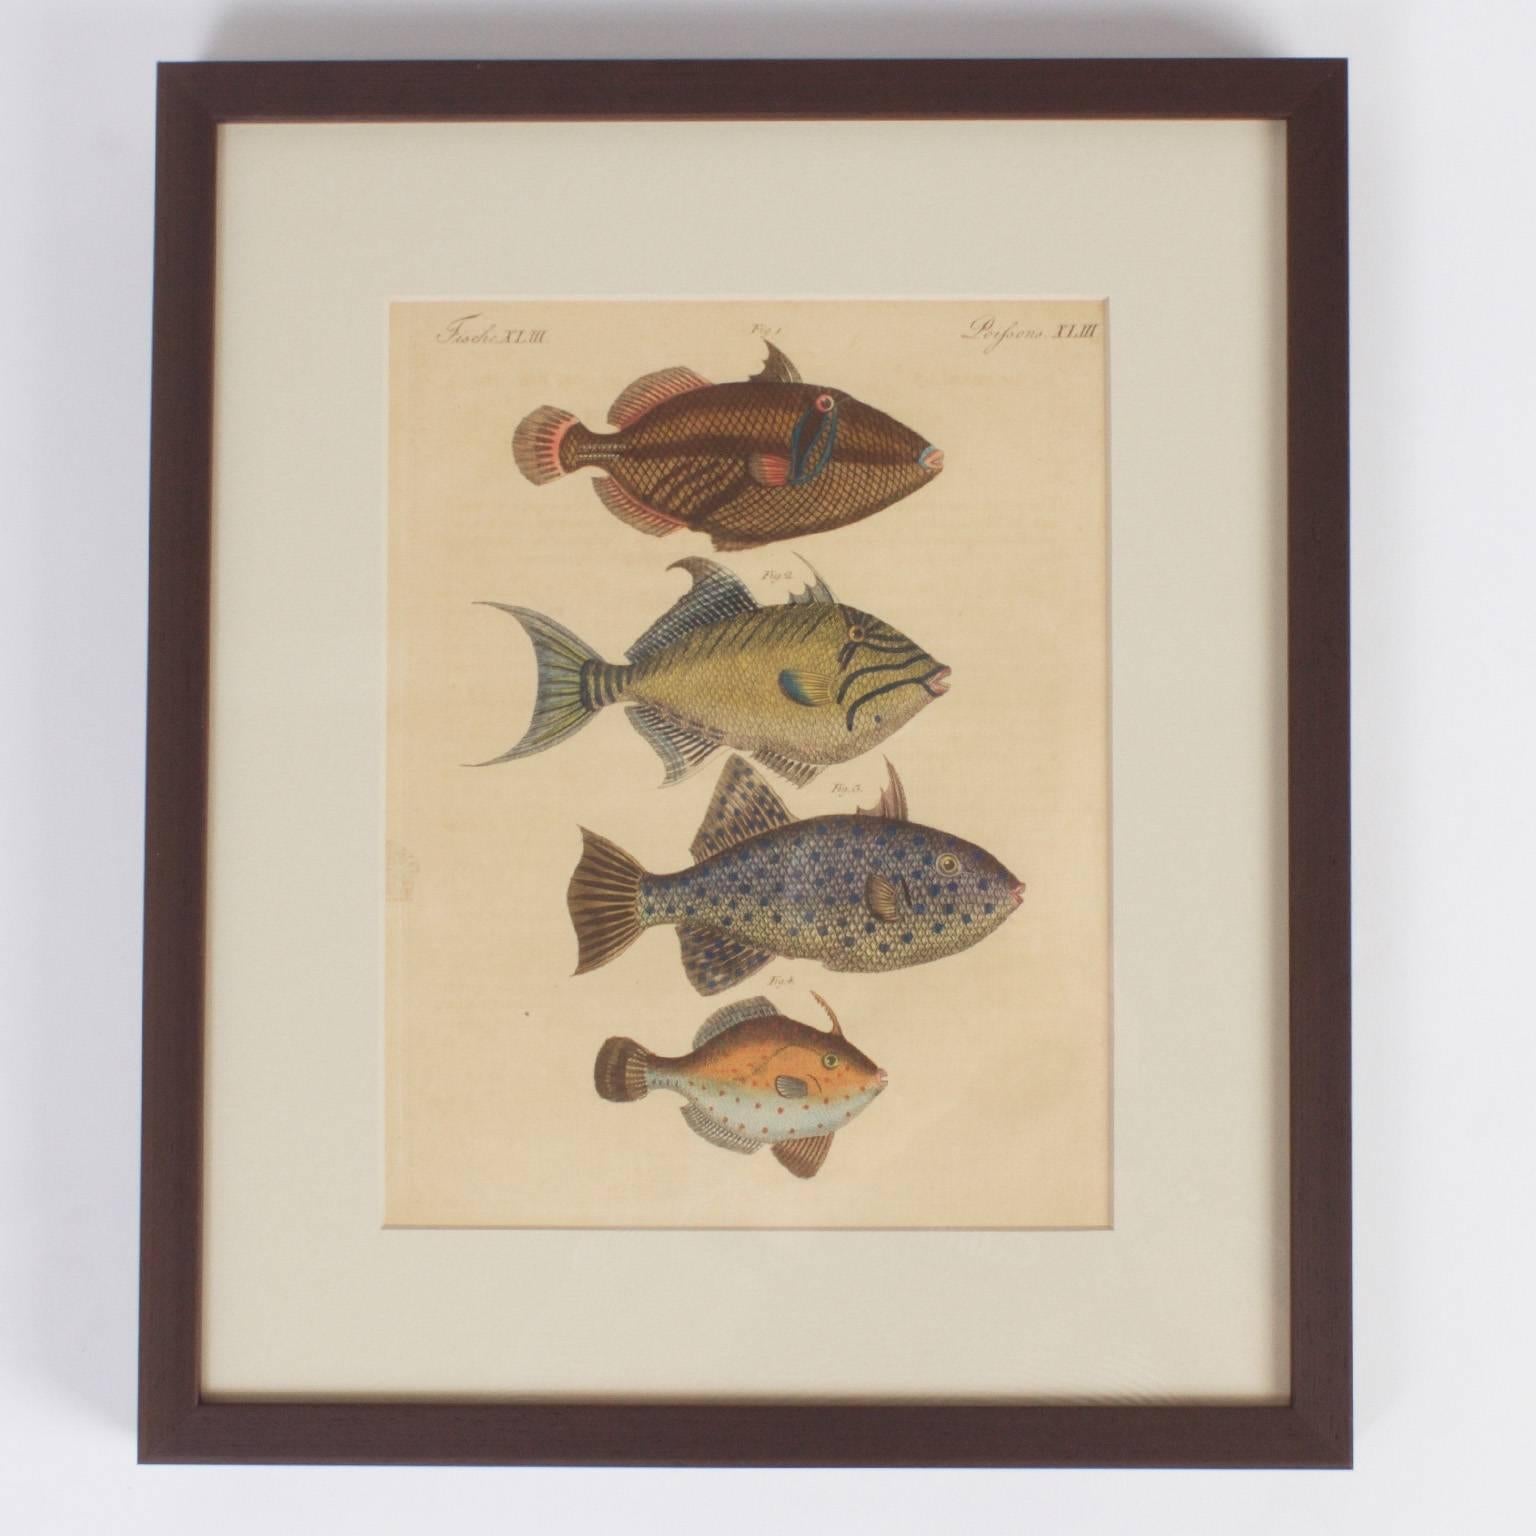 Historical set of four hand colored tropical fish engravings with a naturalist, scholarly approach. Labeled at the top in German and French and presented in handsome wood frames.
   